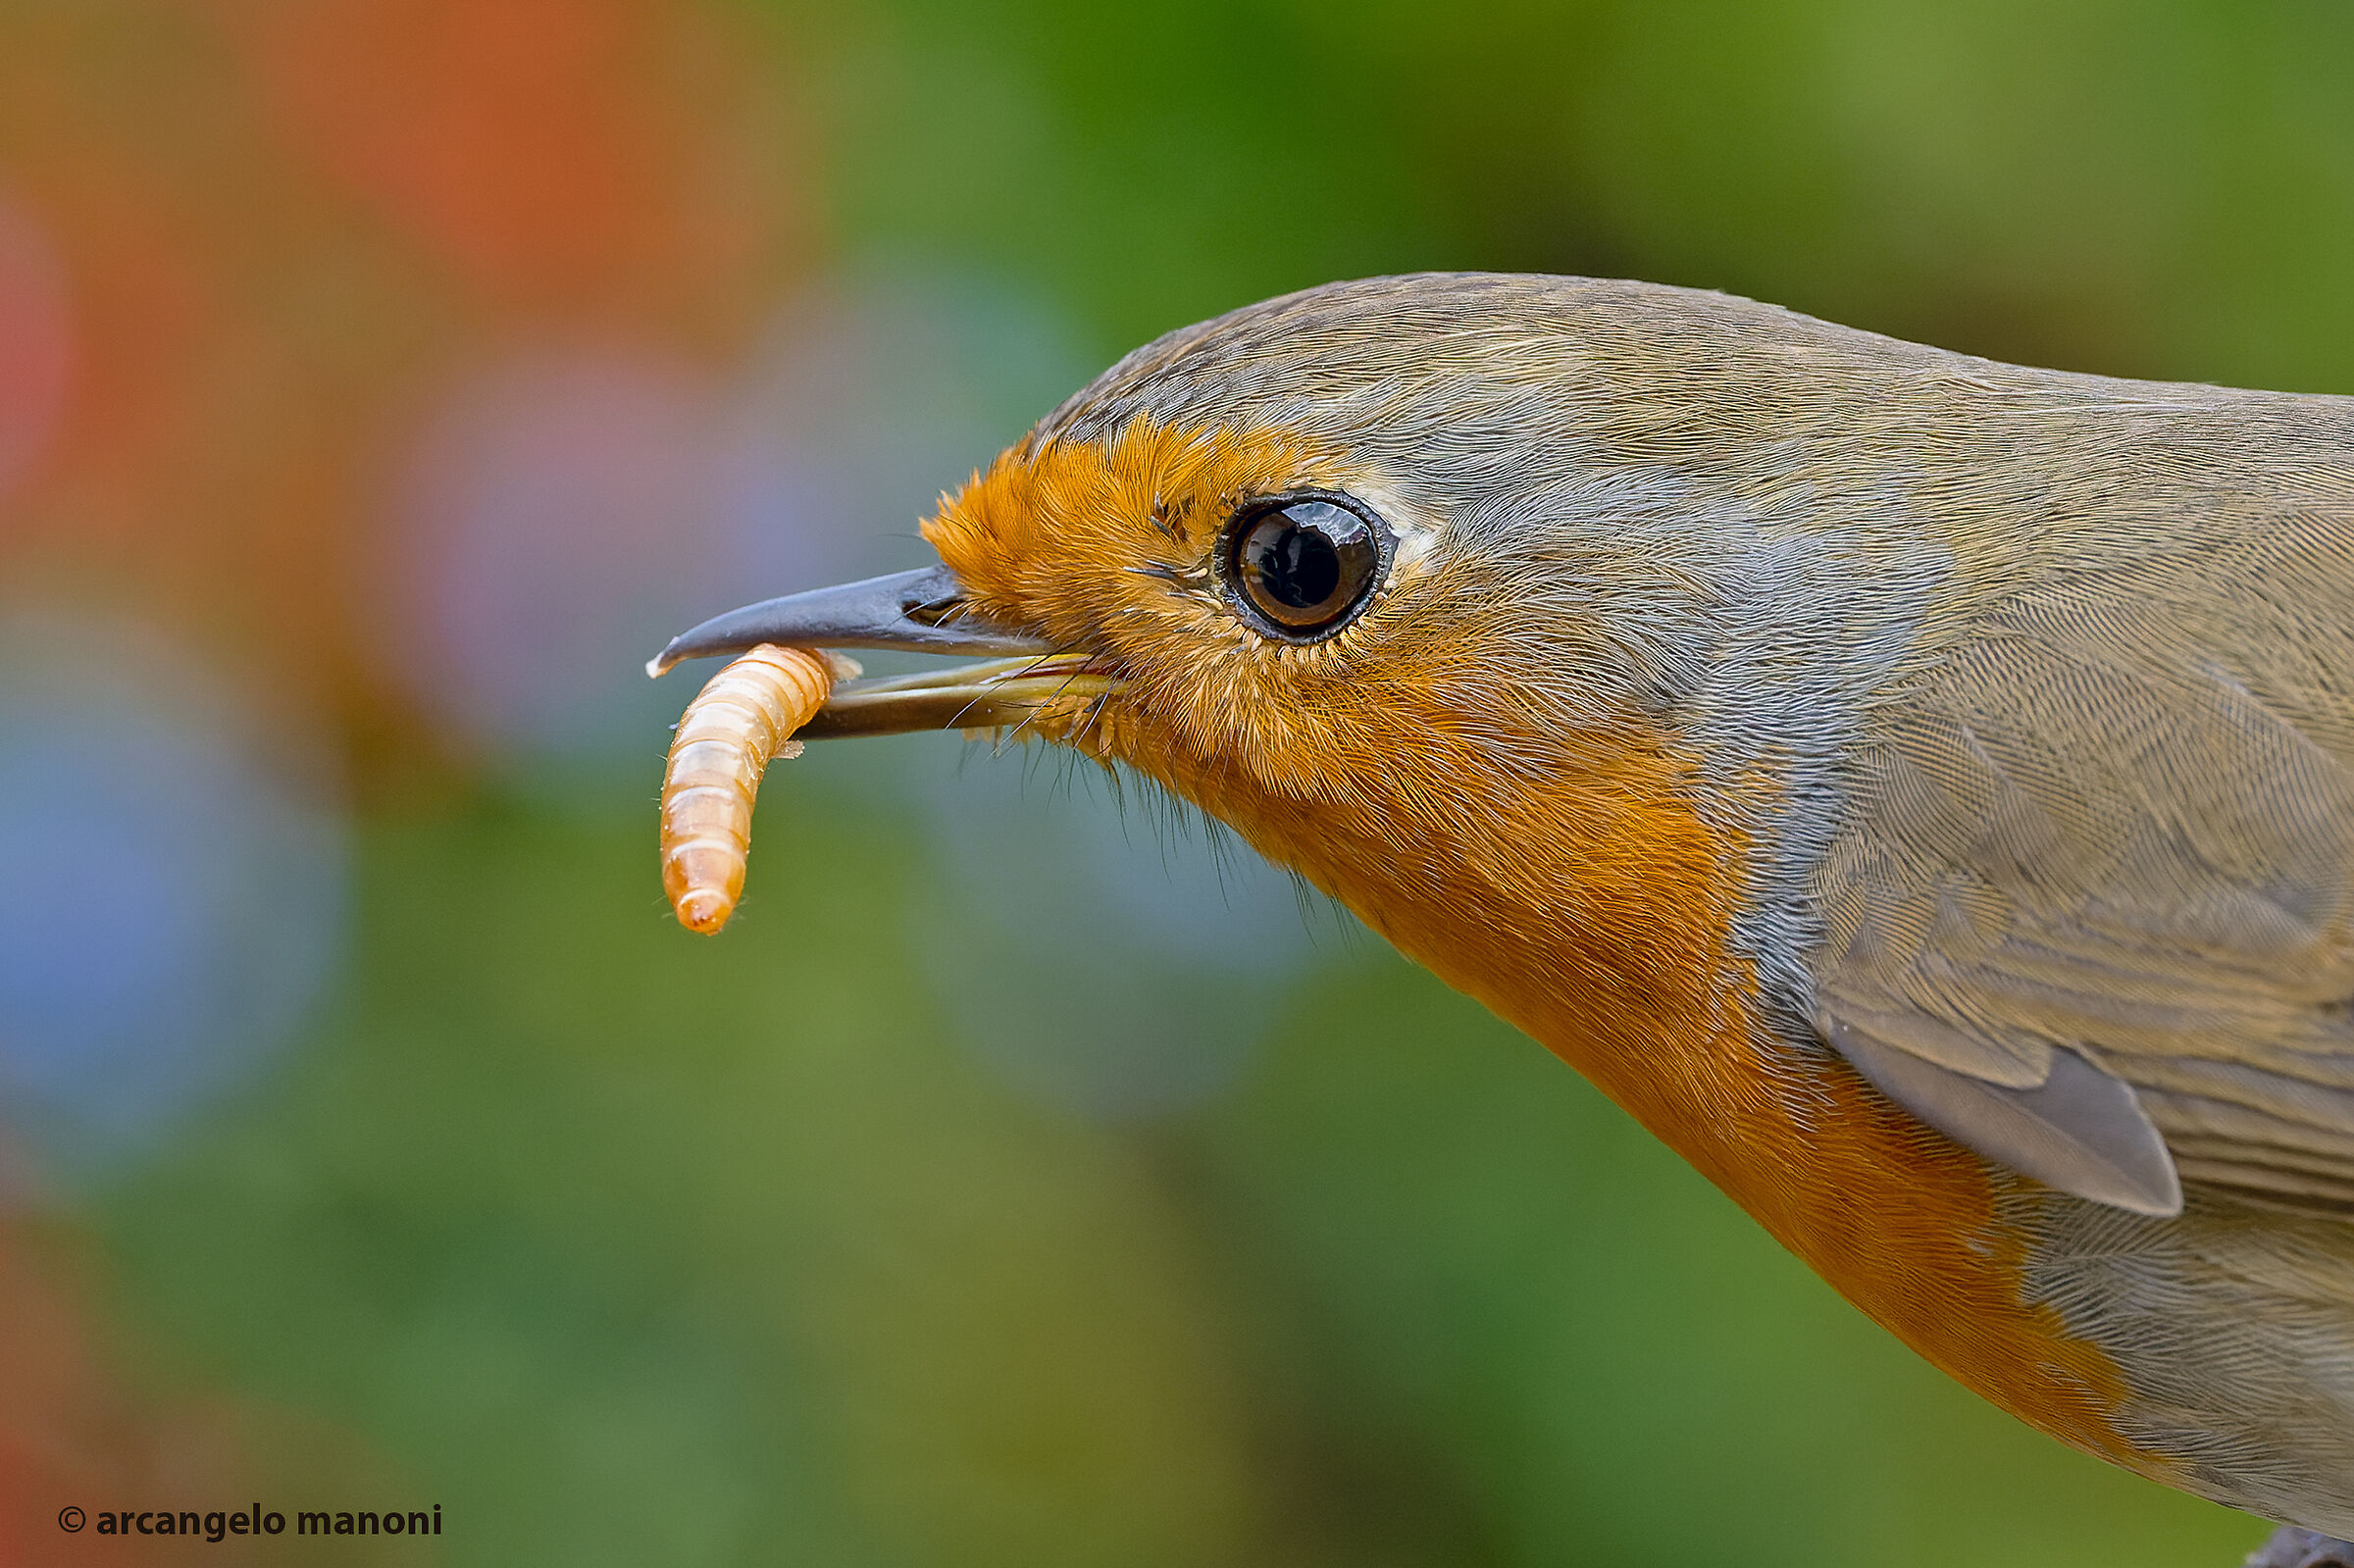 Desire for mealworms...